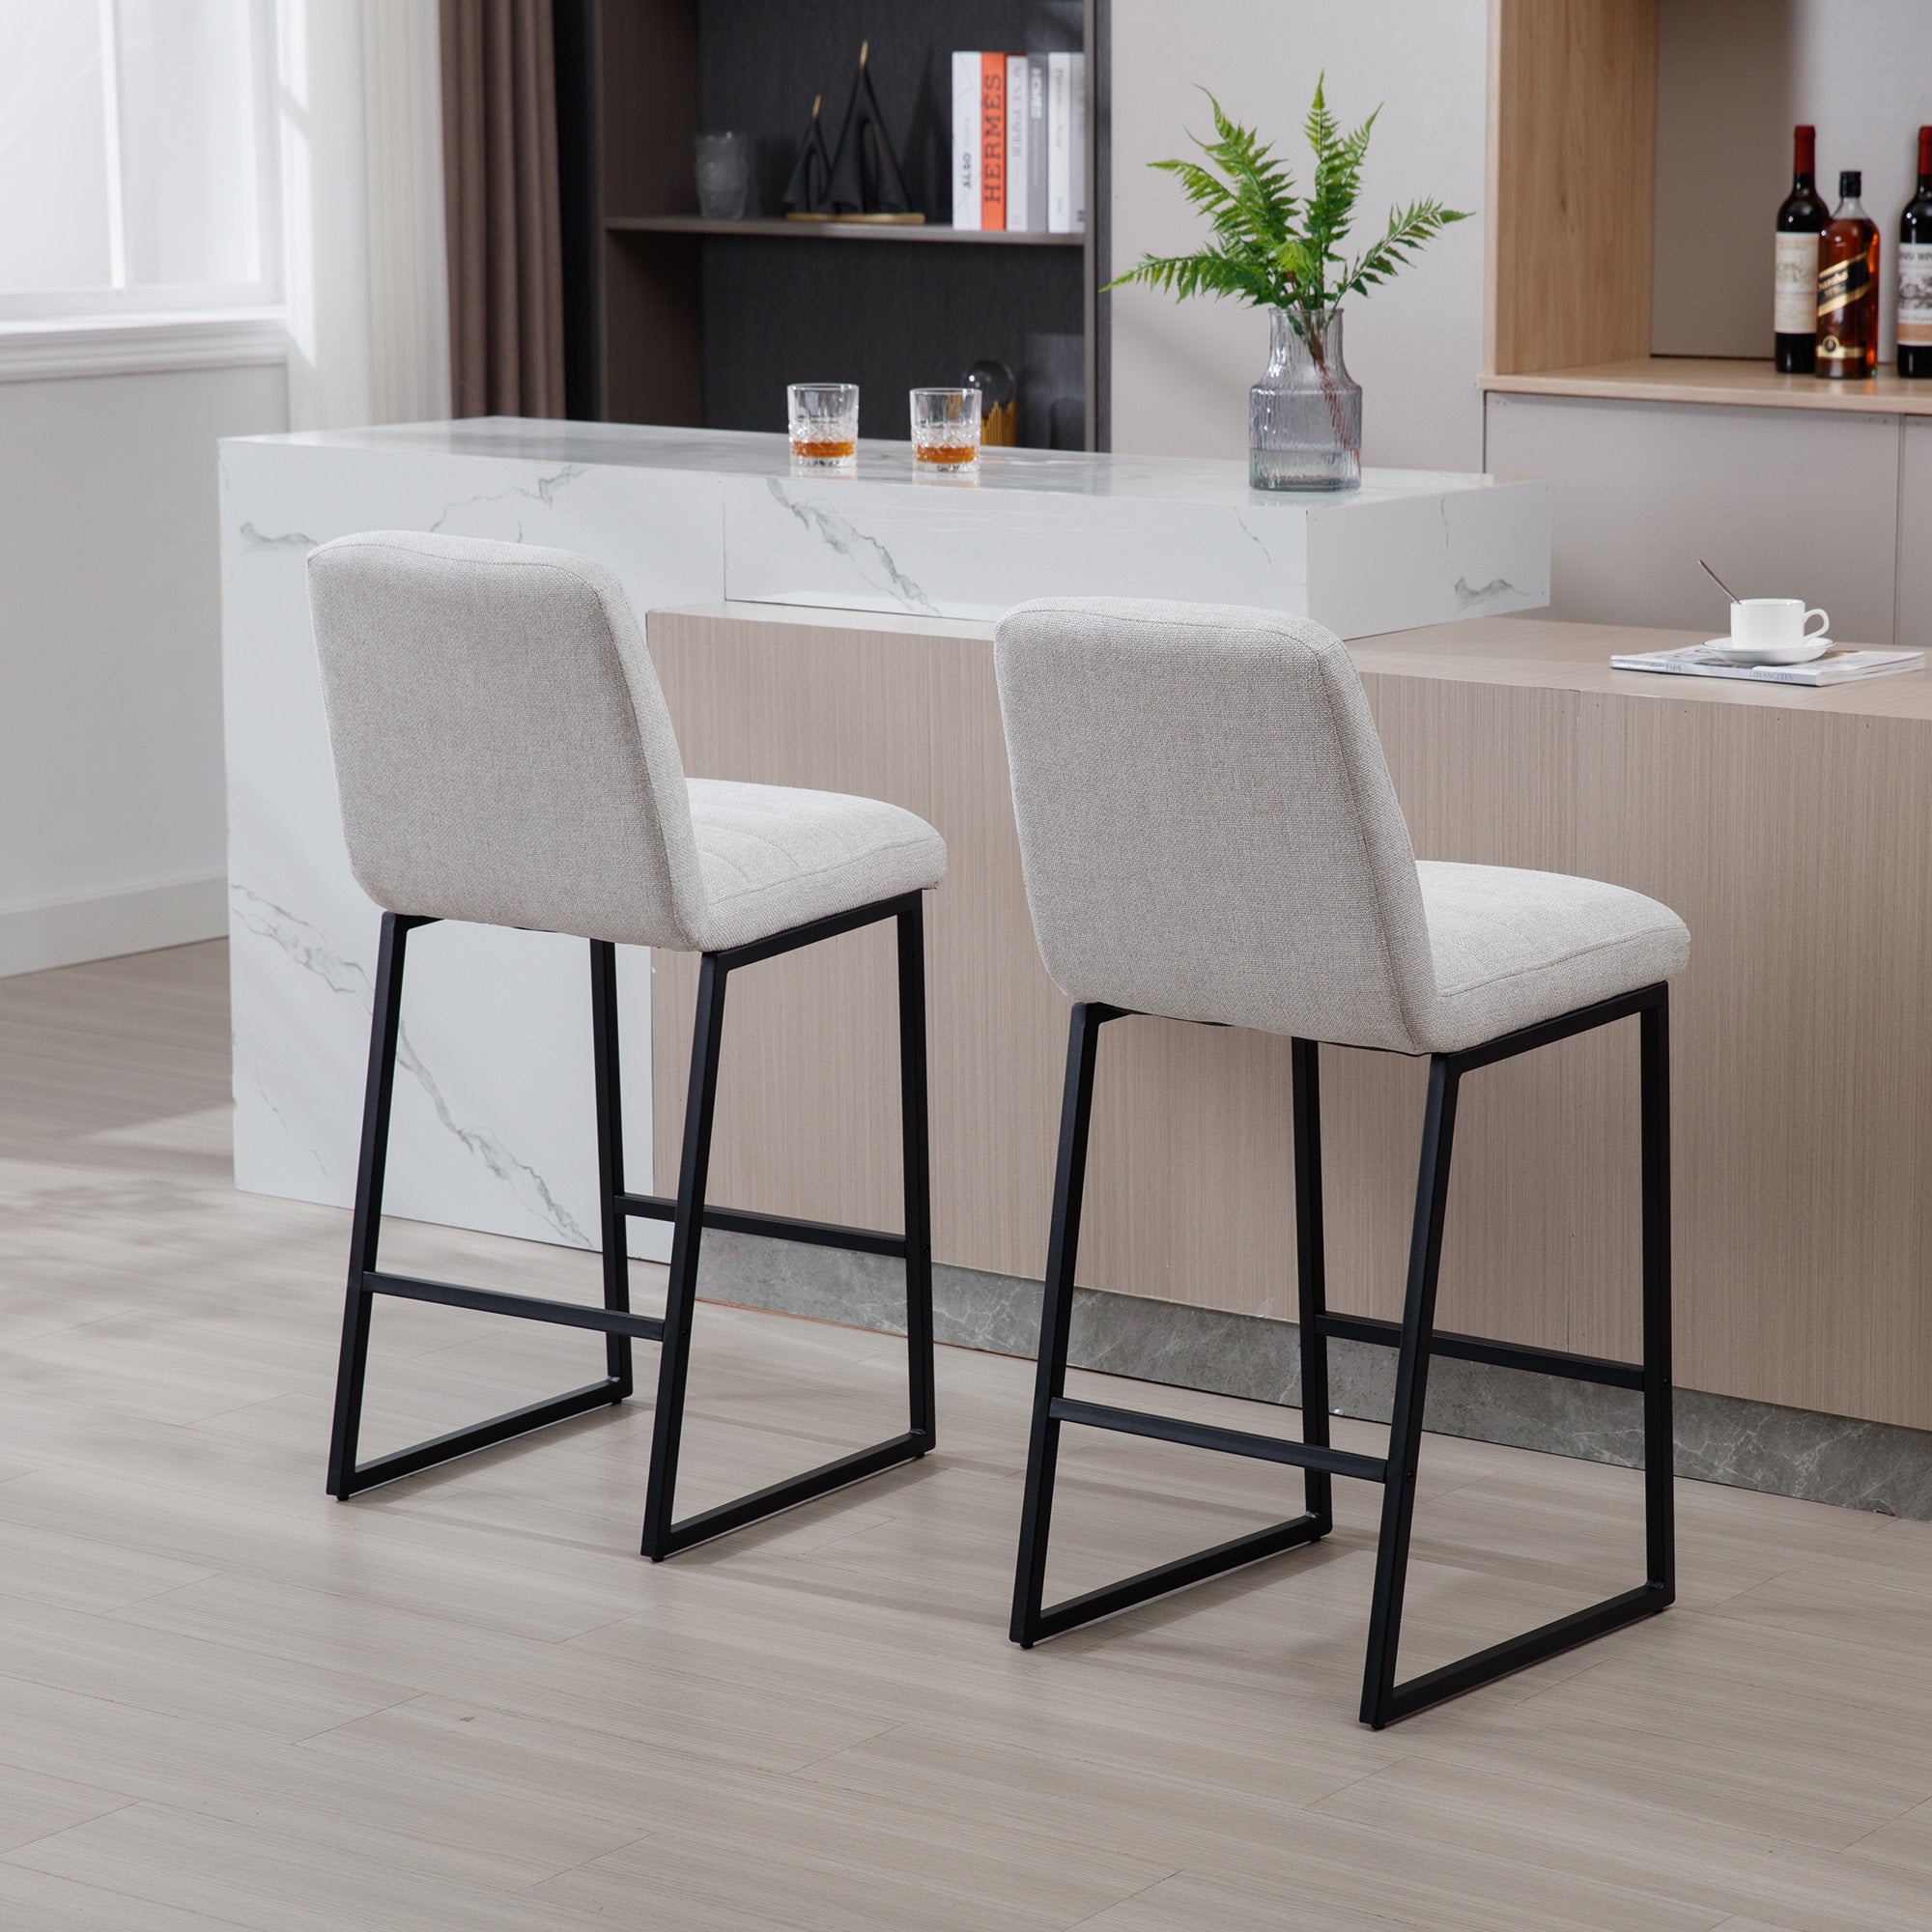 Low Bar Stools Set of 2 Bar Chairs for Living Room beige-kitchen-foam-dry clean-modern-bar